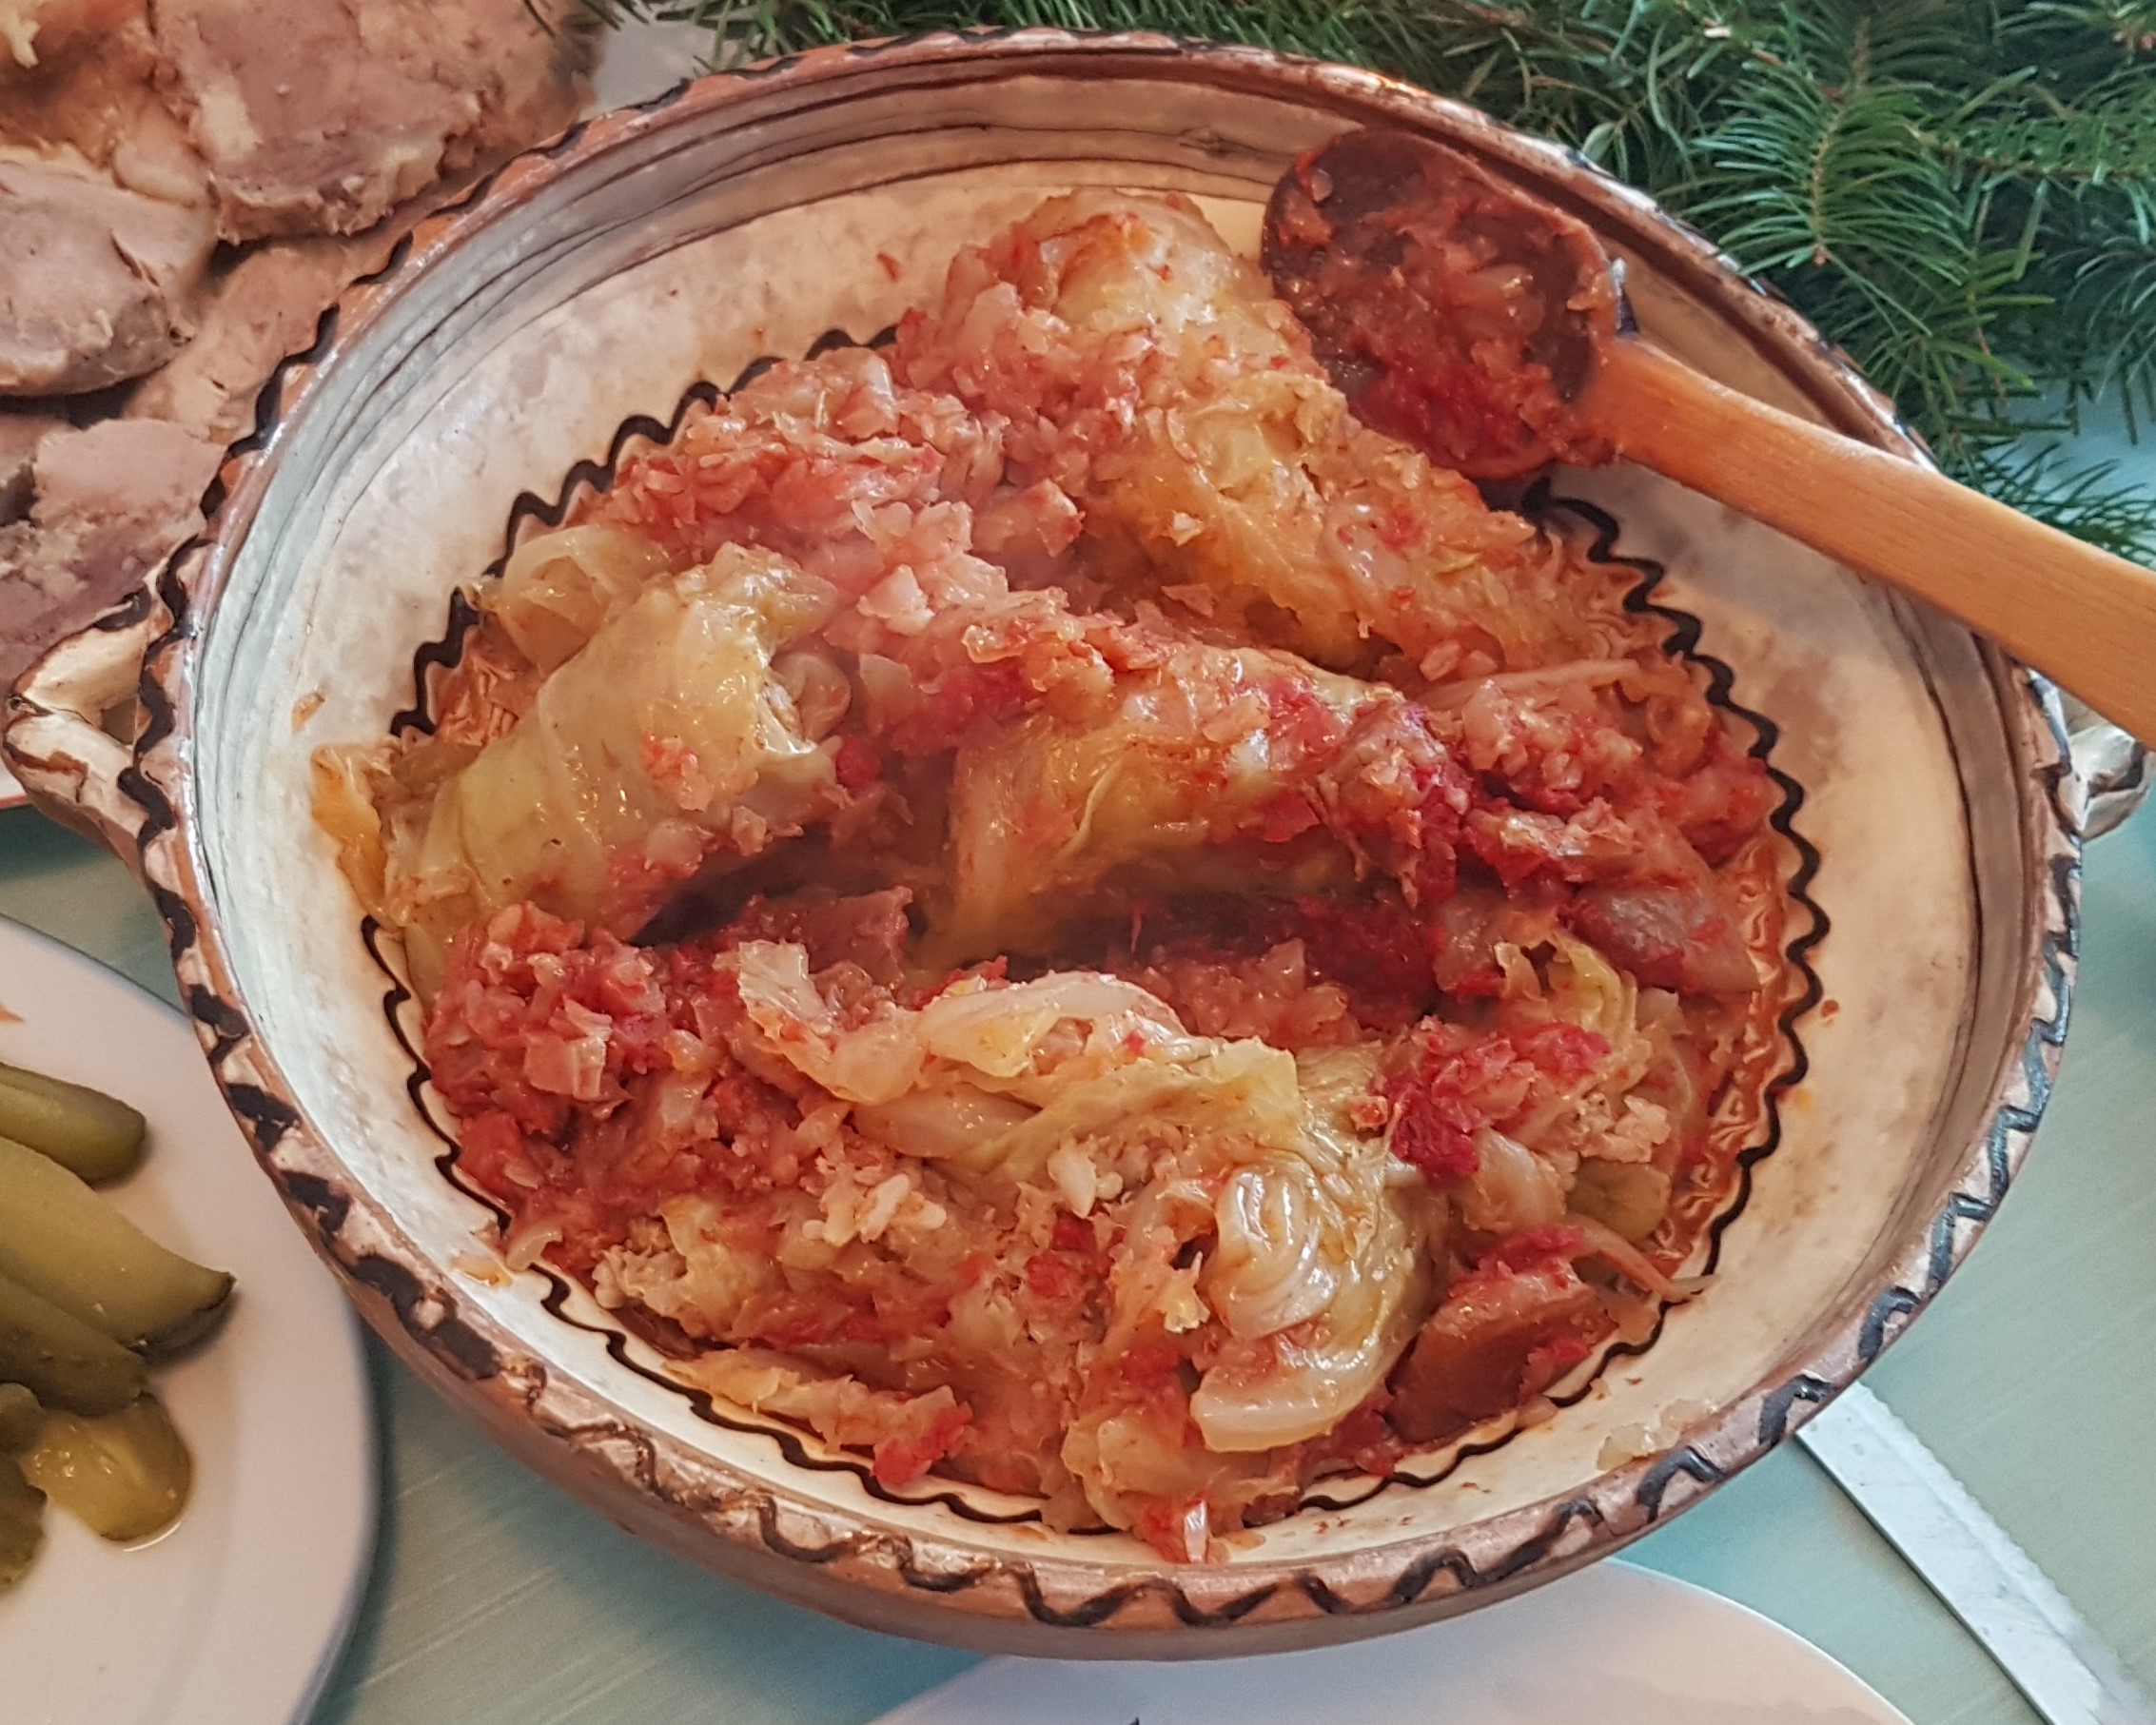 Cabbage Rolls on Christmas Table